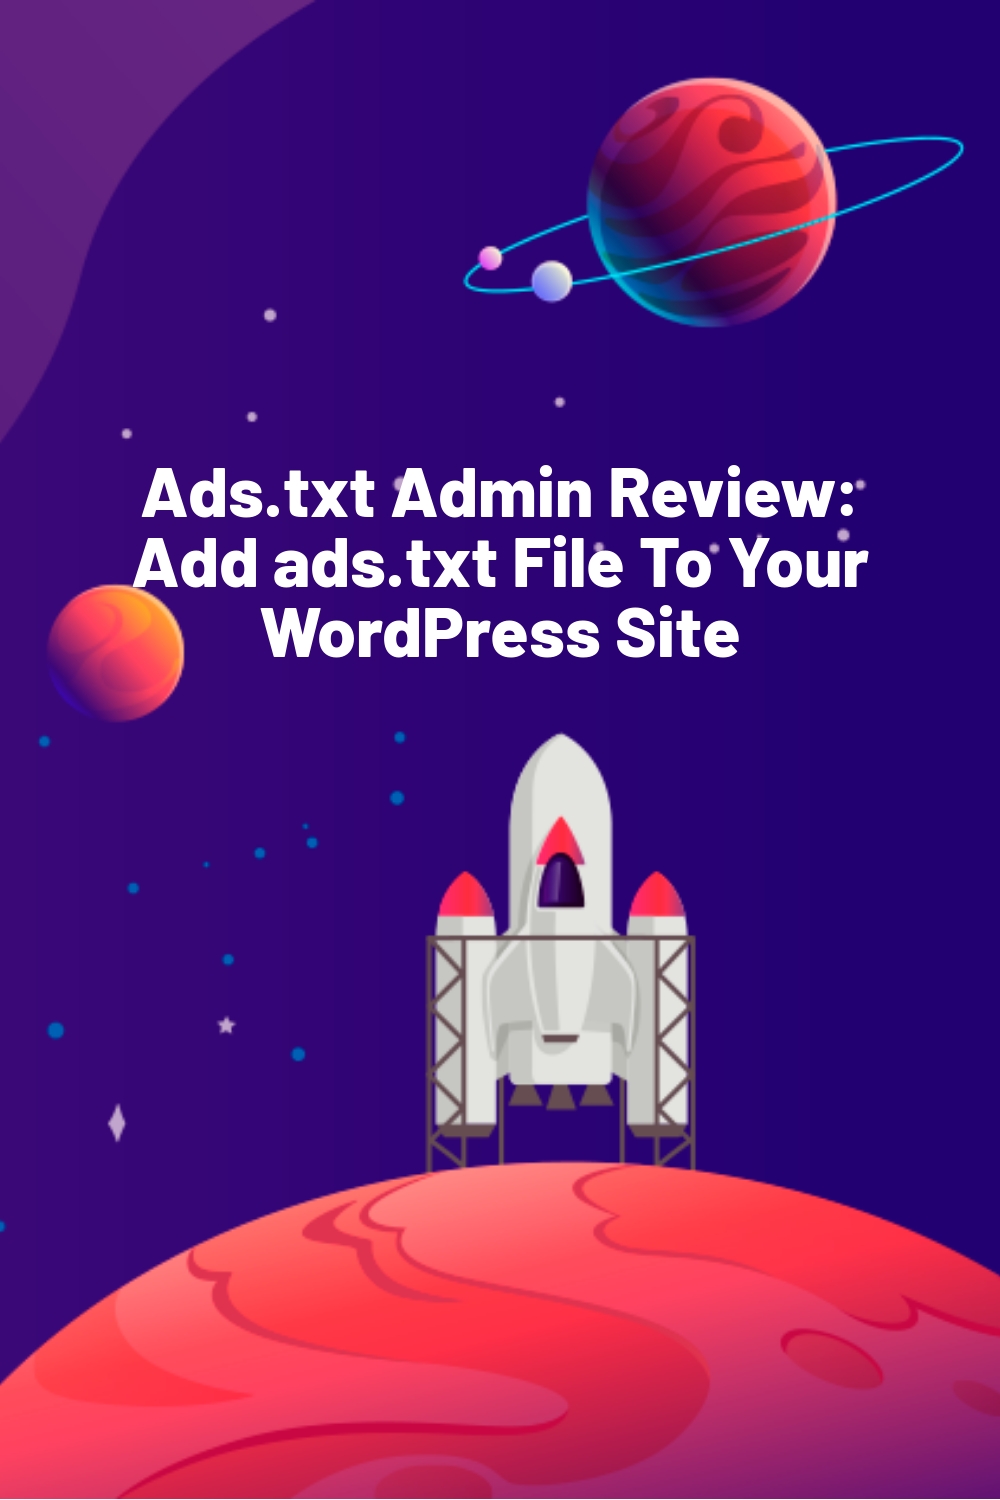 Ads.txt Admin Review: Add ads.txt File To Your WordPress Site